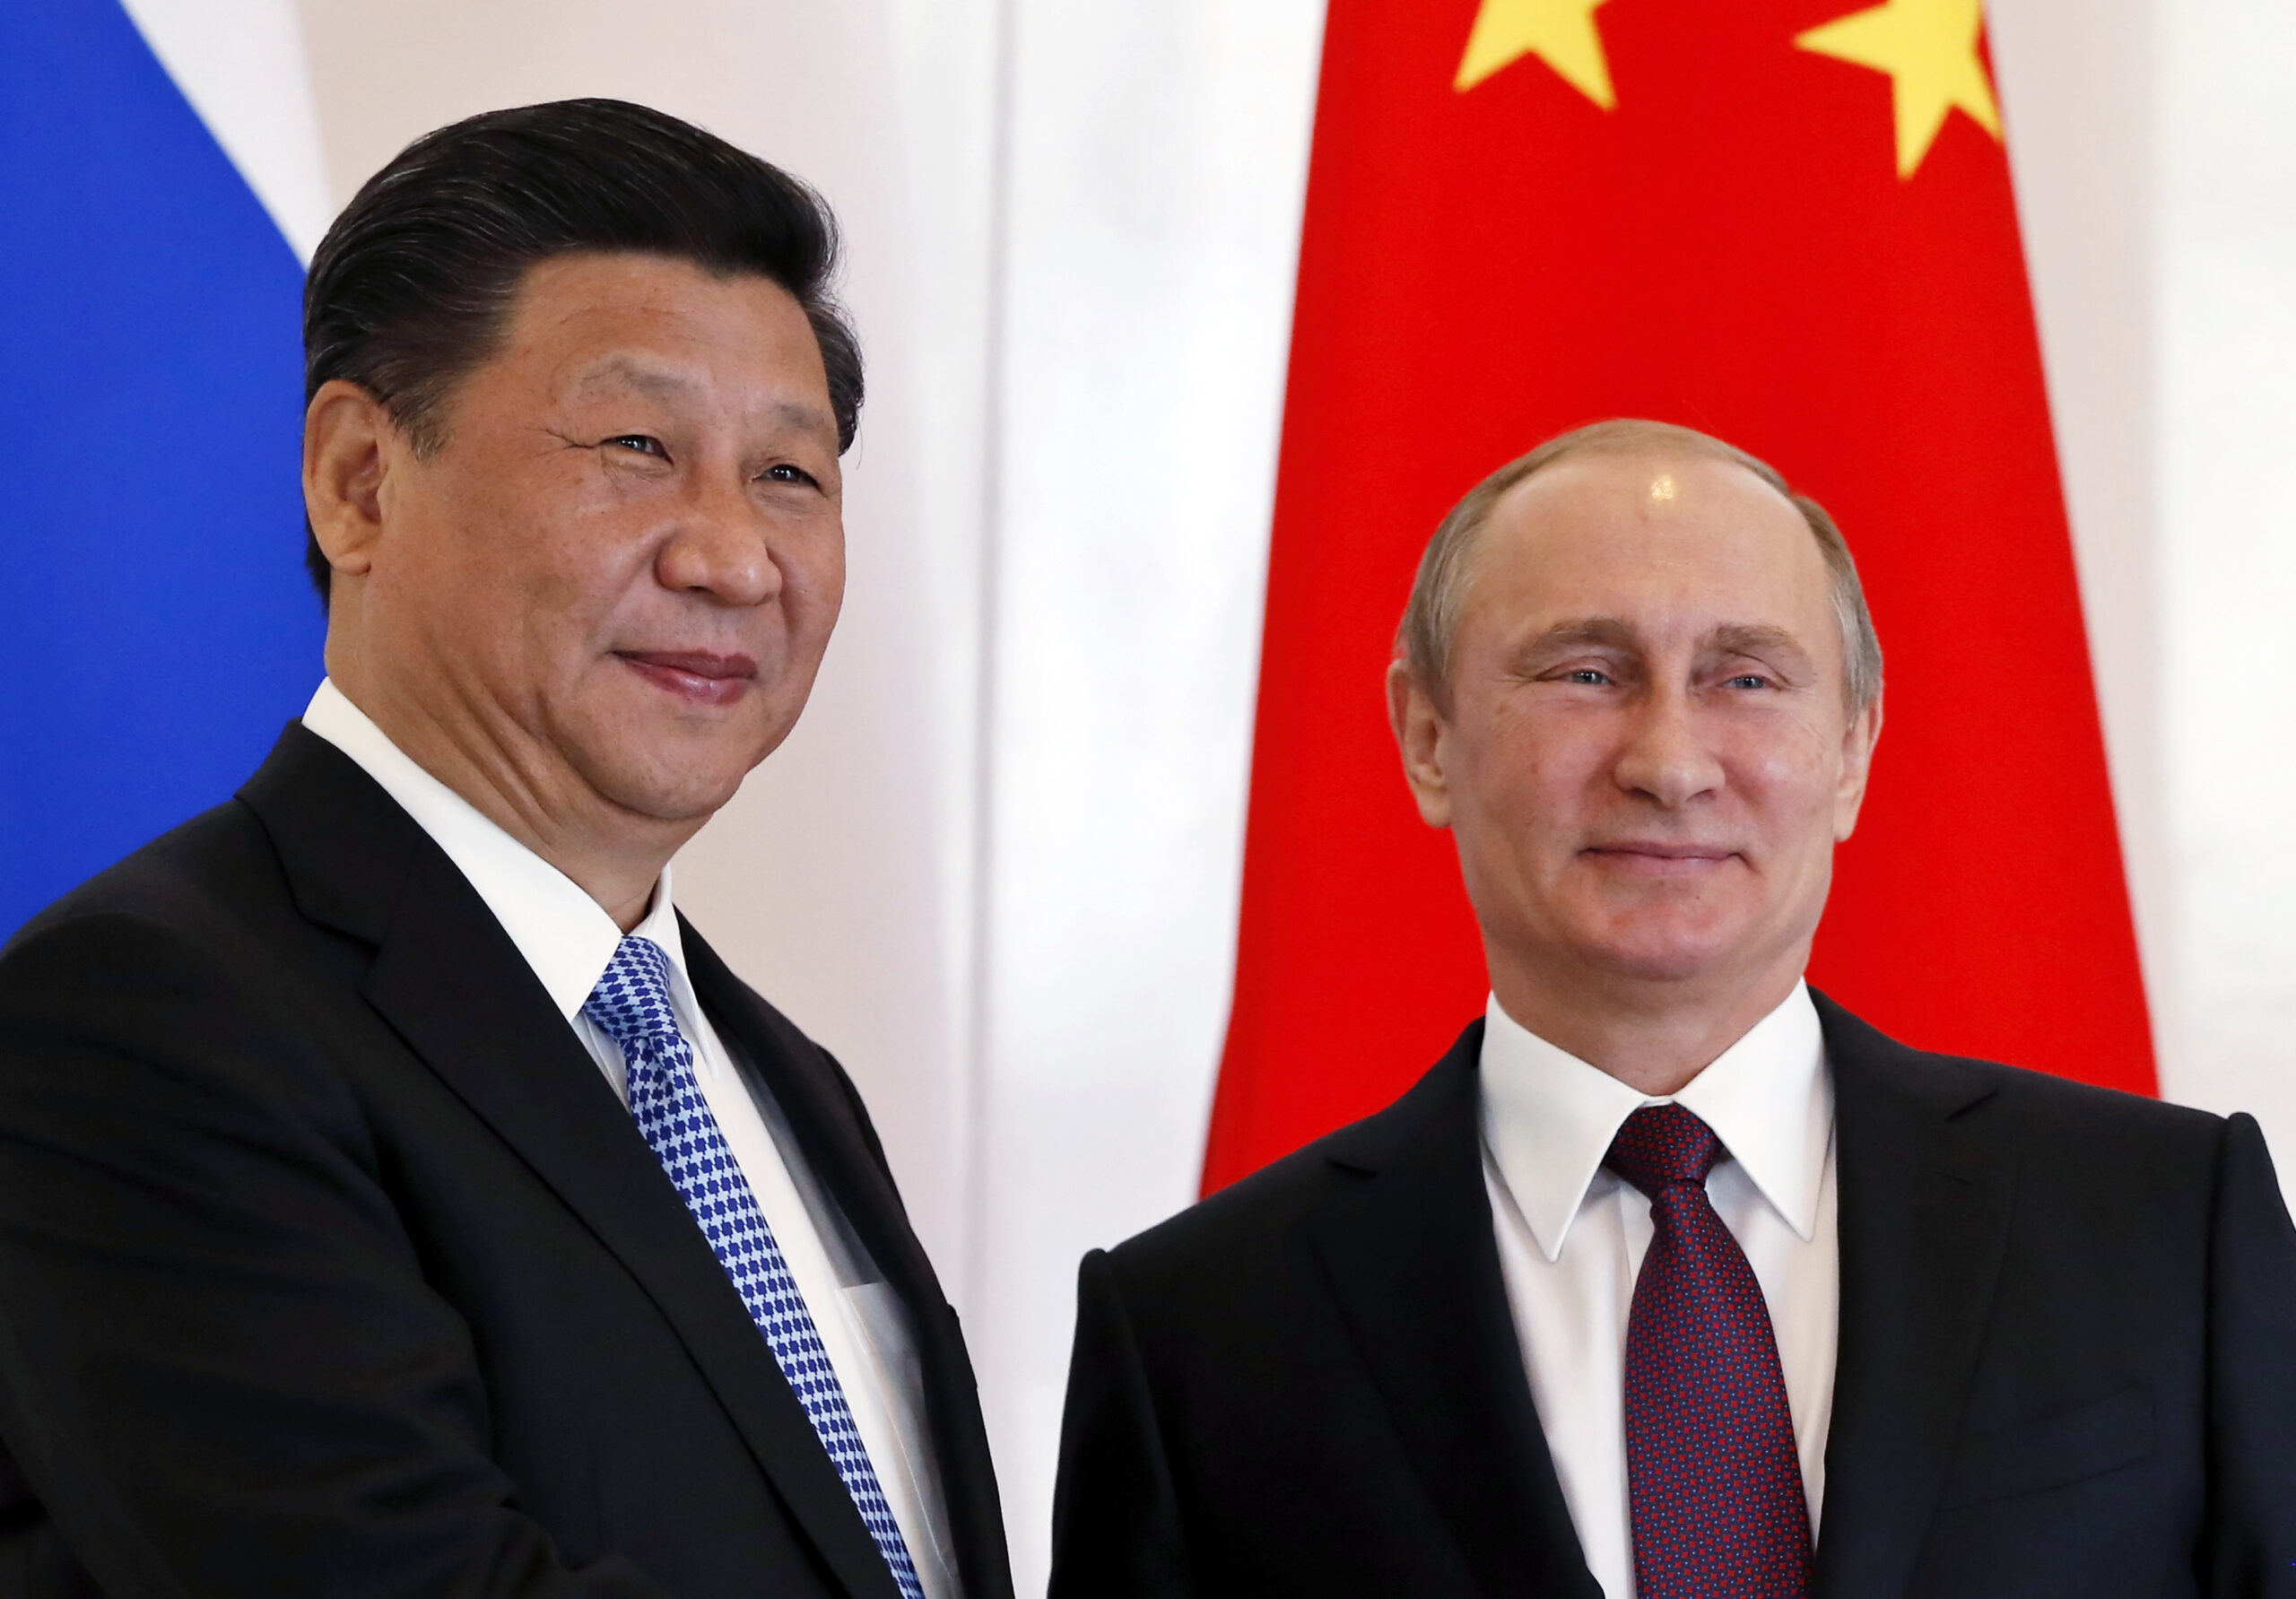 Vladimir Putin And Xi Jinping Discussed Afghanistan, Agreed on Countering Terrorism